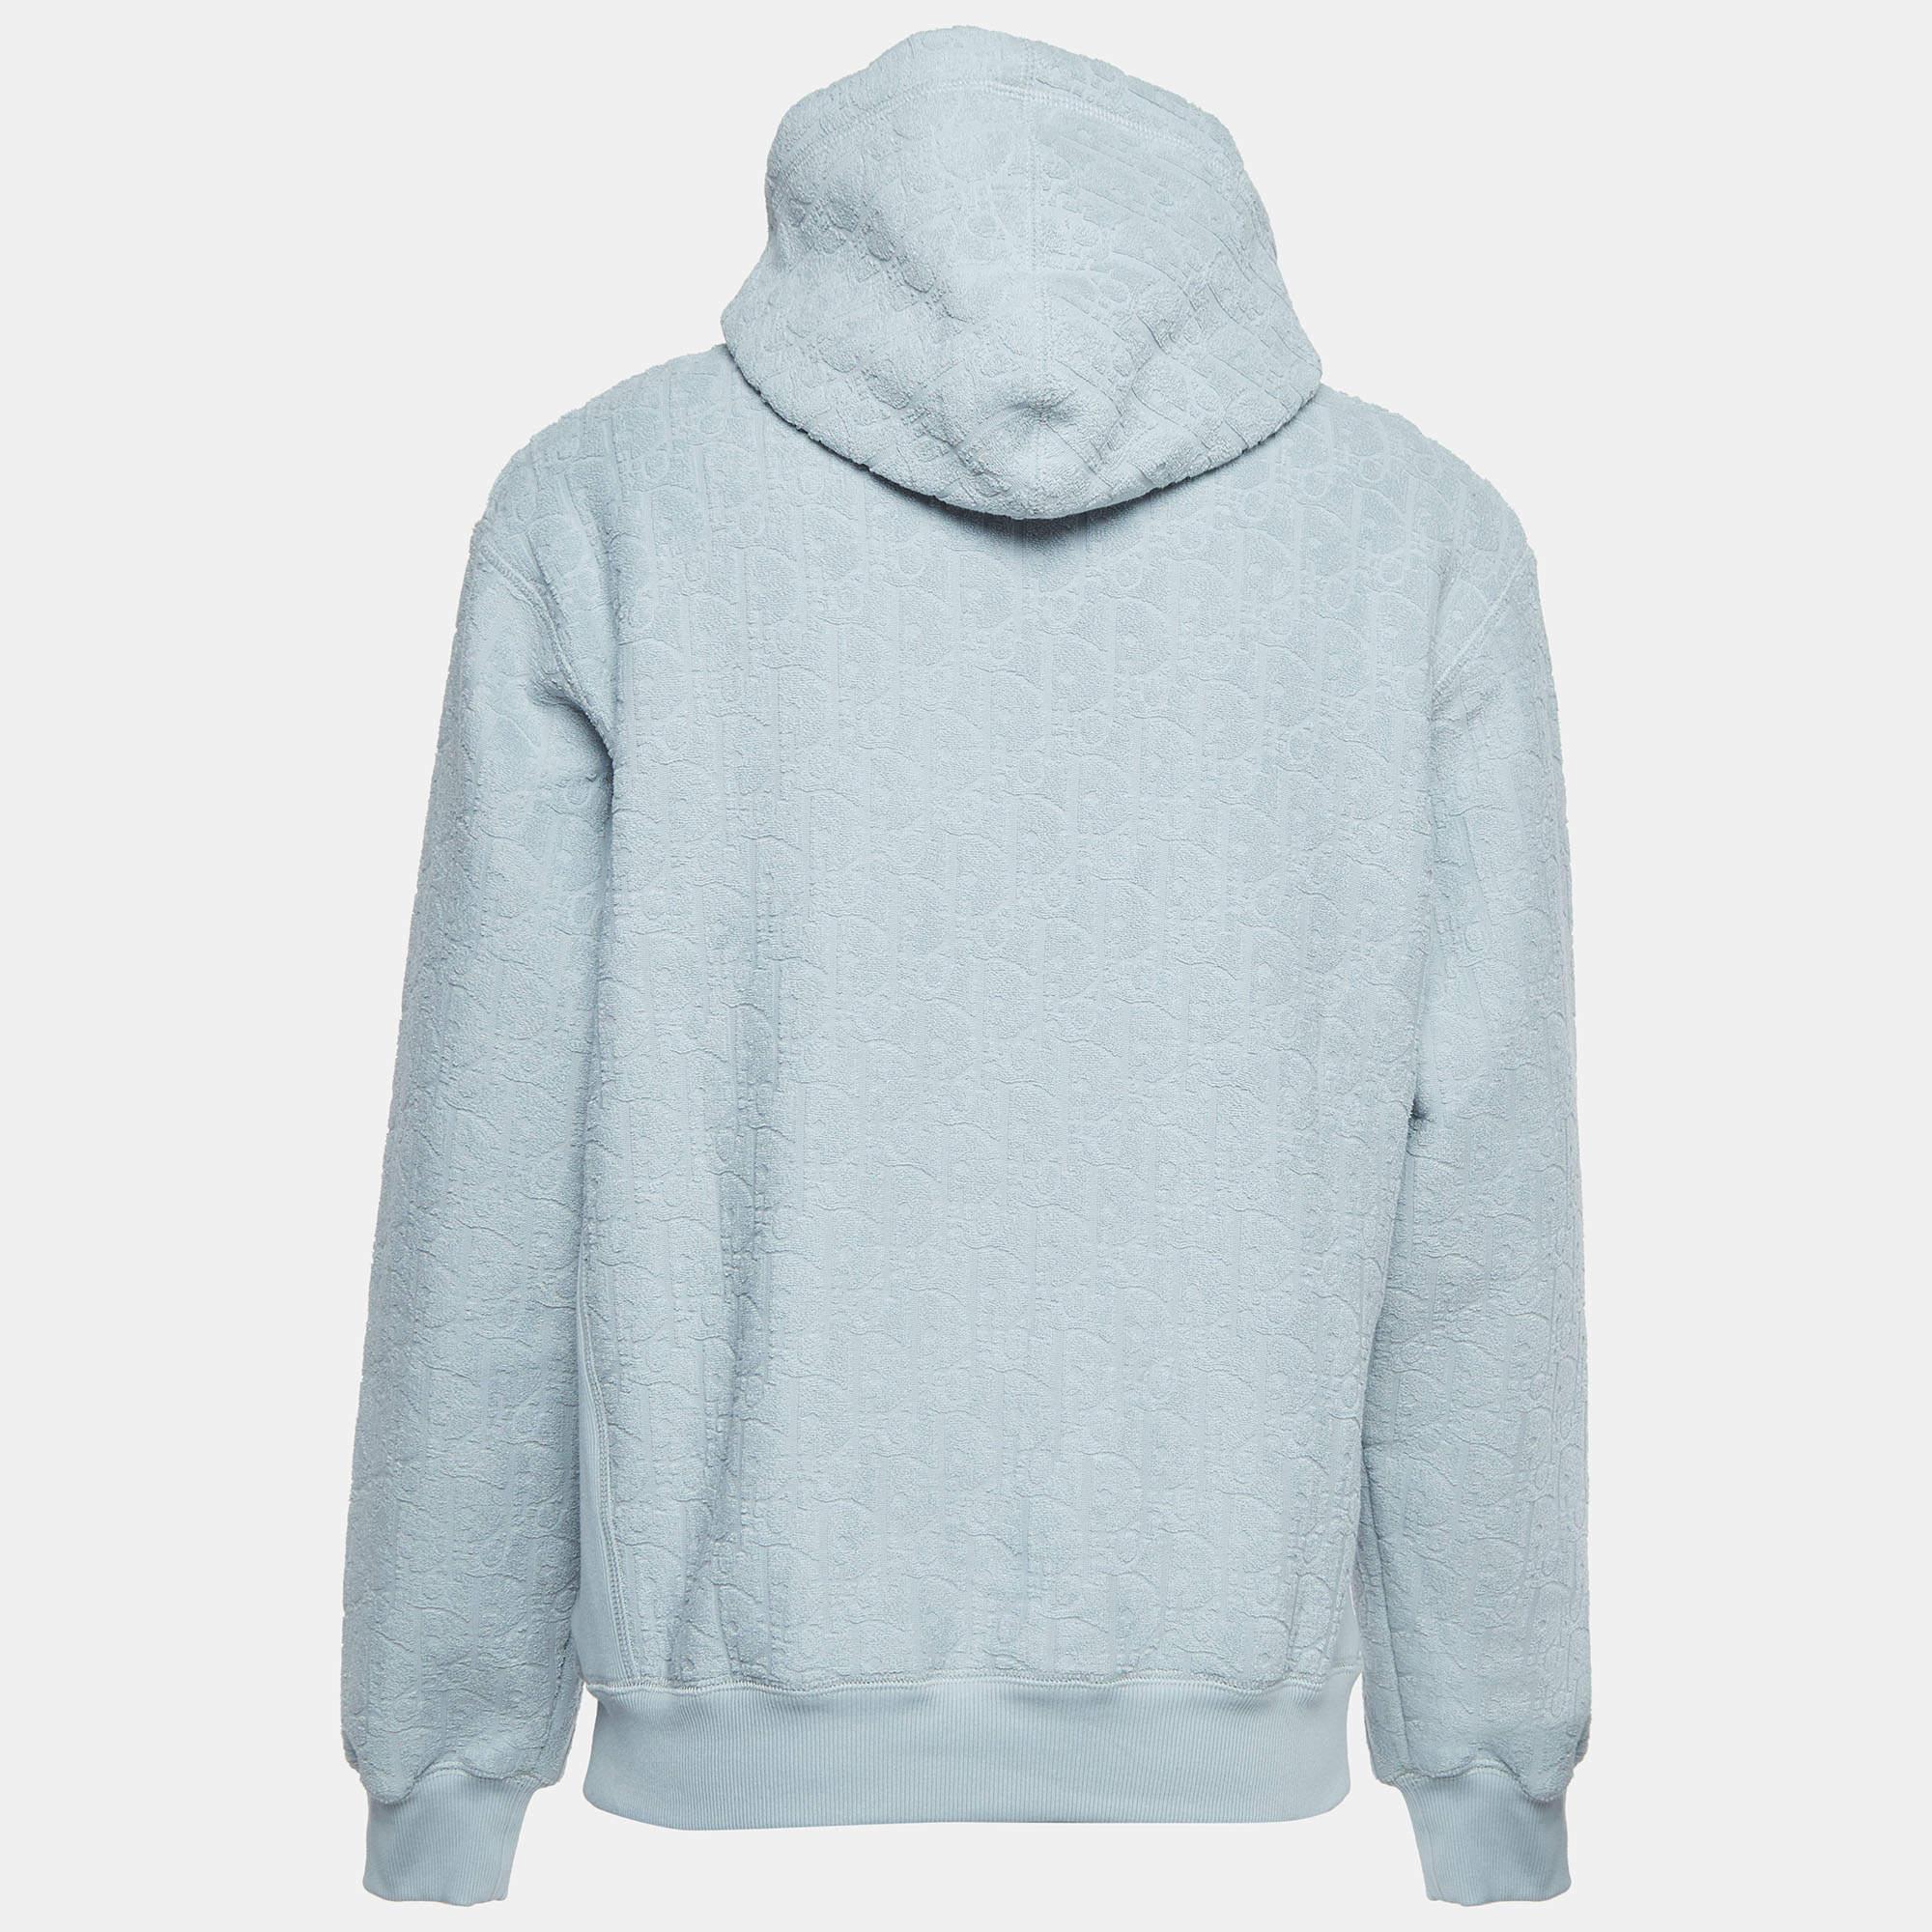 This Dior Homme hoodie is all about sporting a classy and comfy style. It is tailored from soft fabric, which is highlighted with signature accents.

